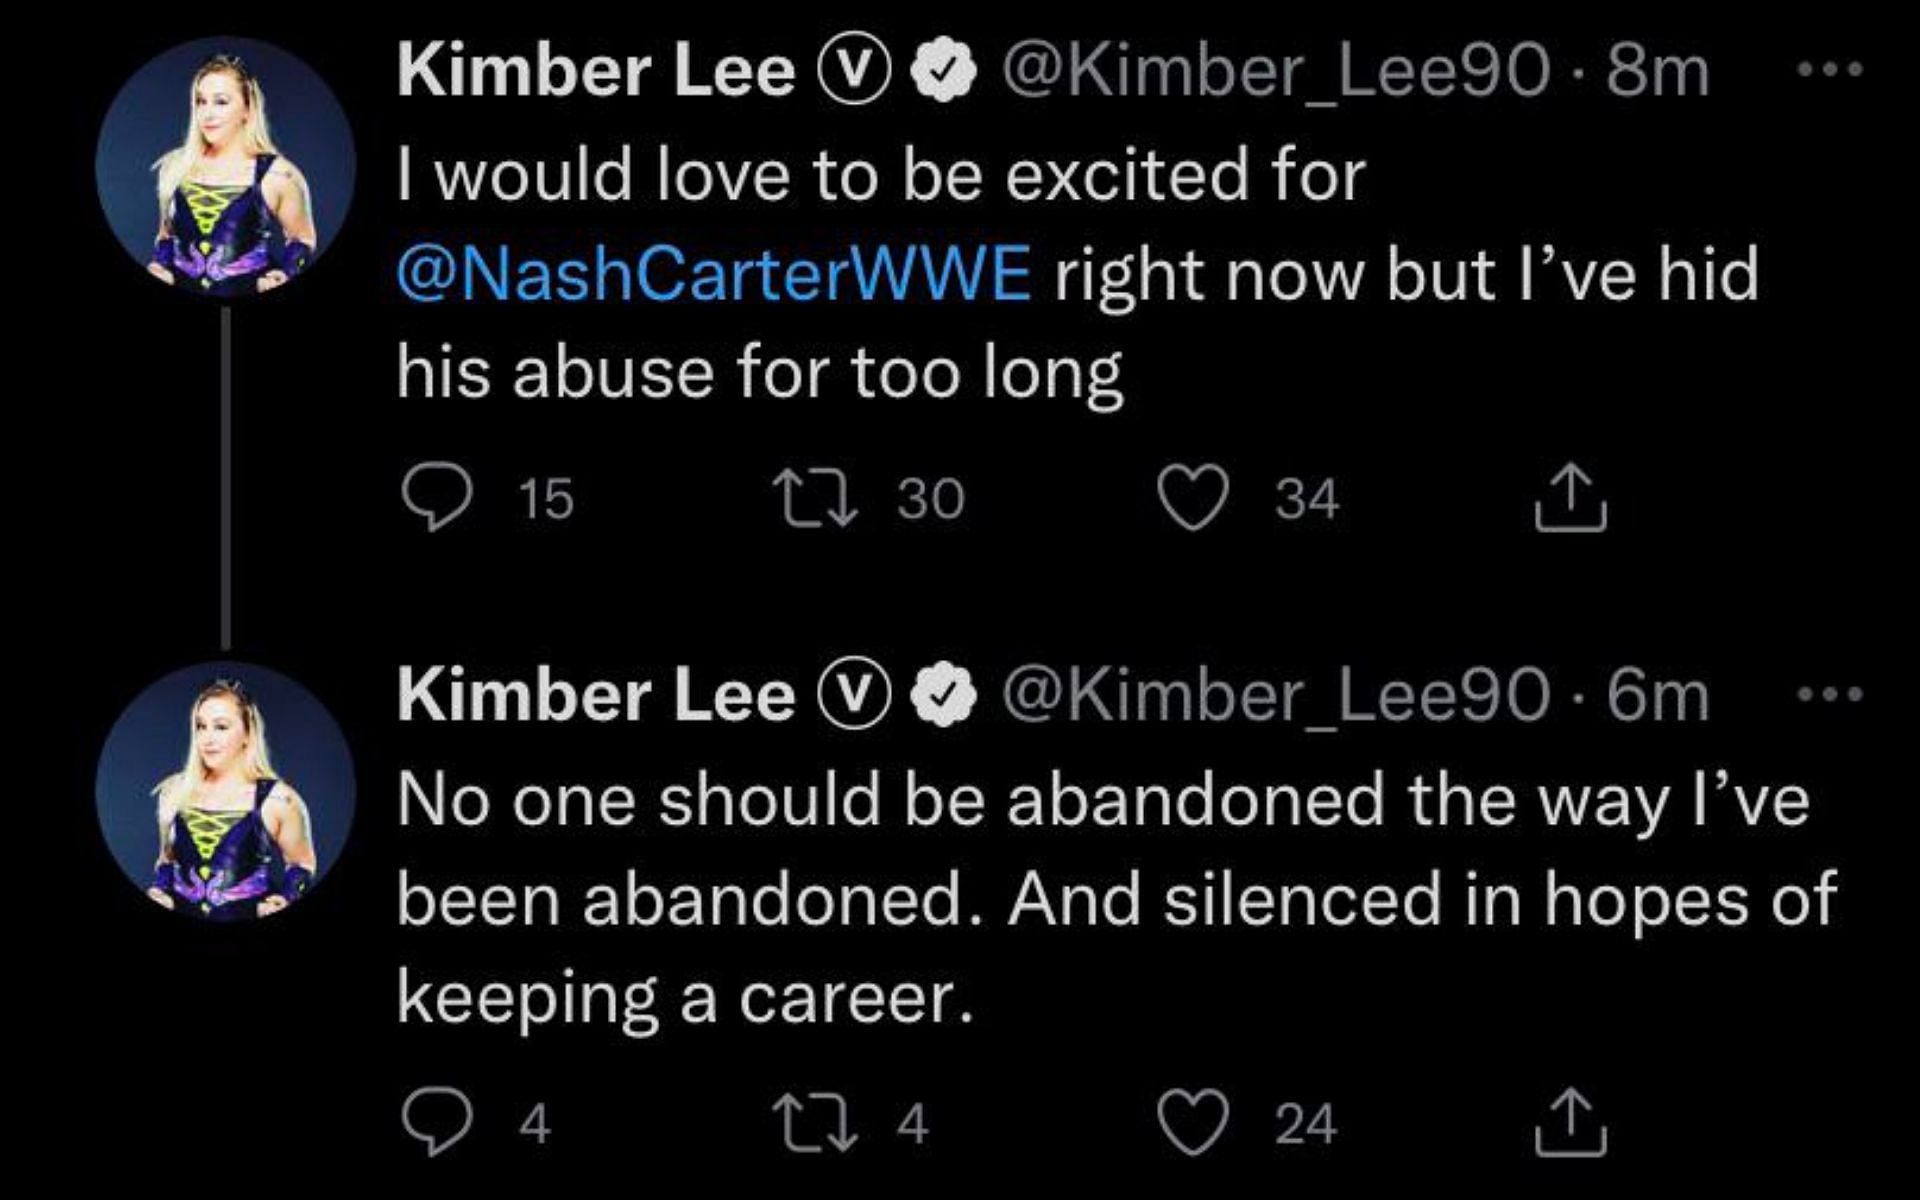 Kimber Lee leveled serious accusations towards Nash Carter in a couple of tweets